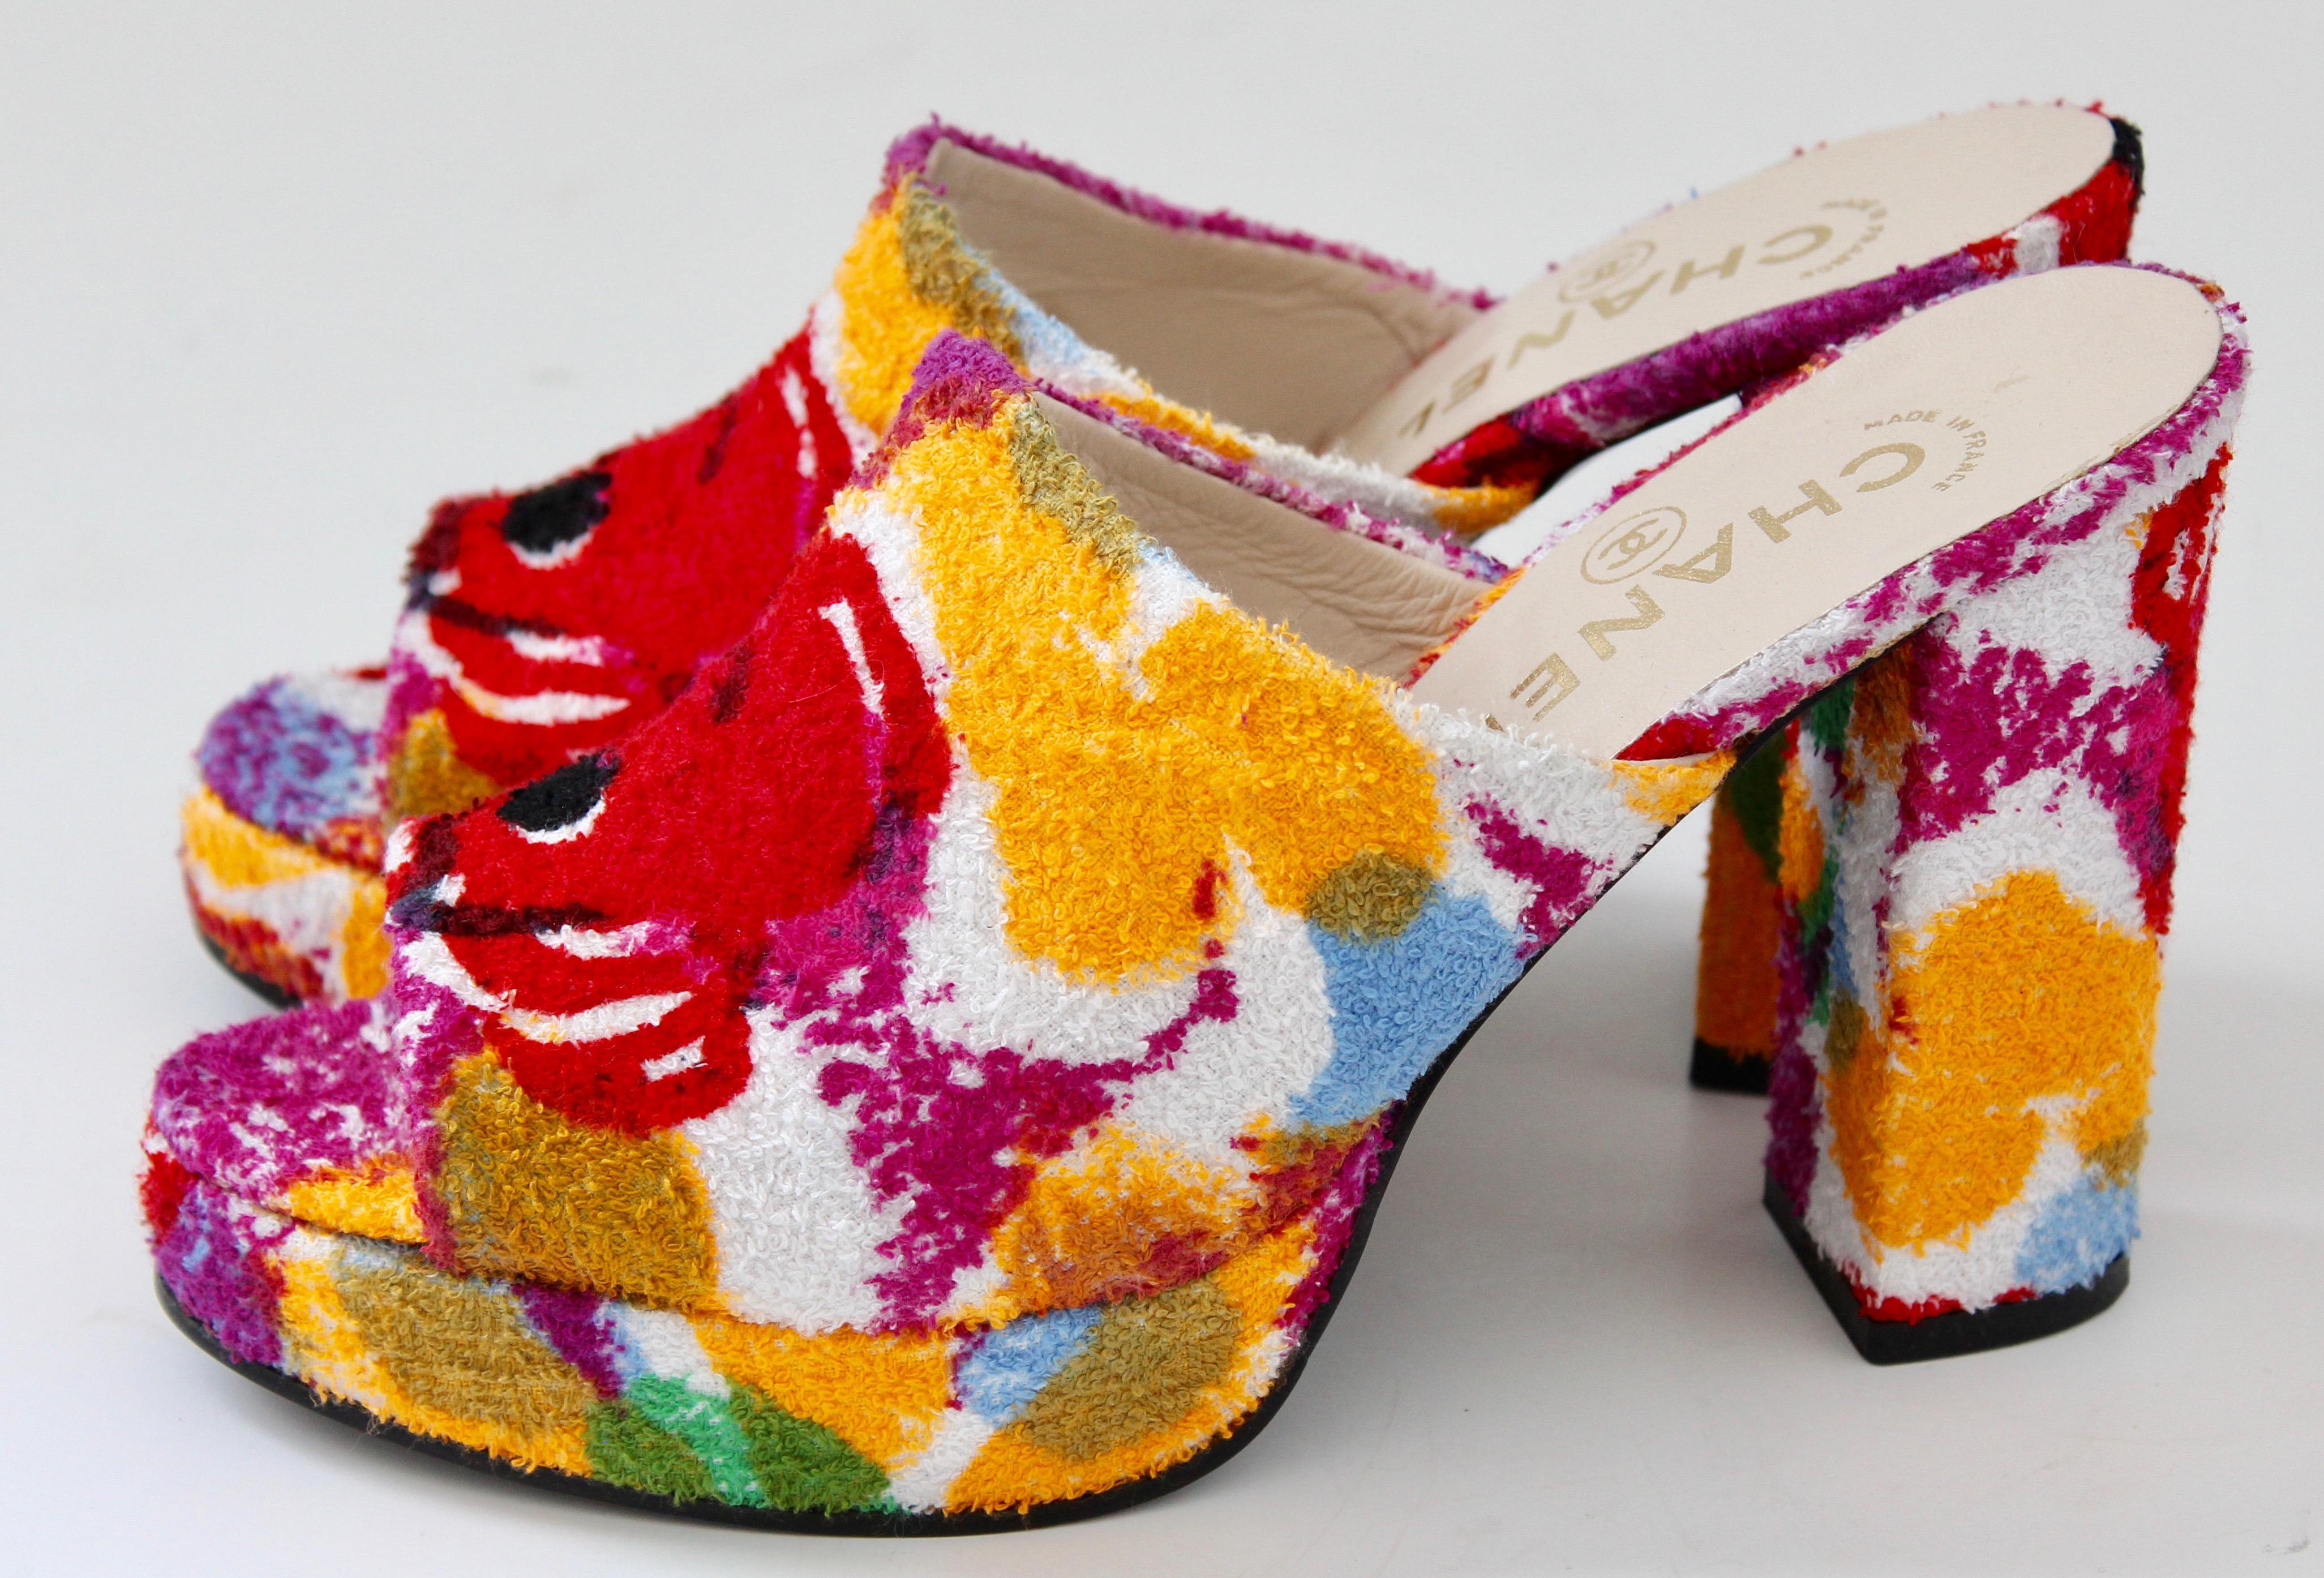 Women's Chanel Multicolor Floral Platforms Sandals Heels Terry Cloth New Old Stock 38 